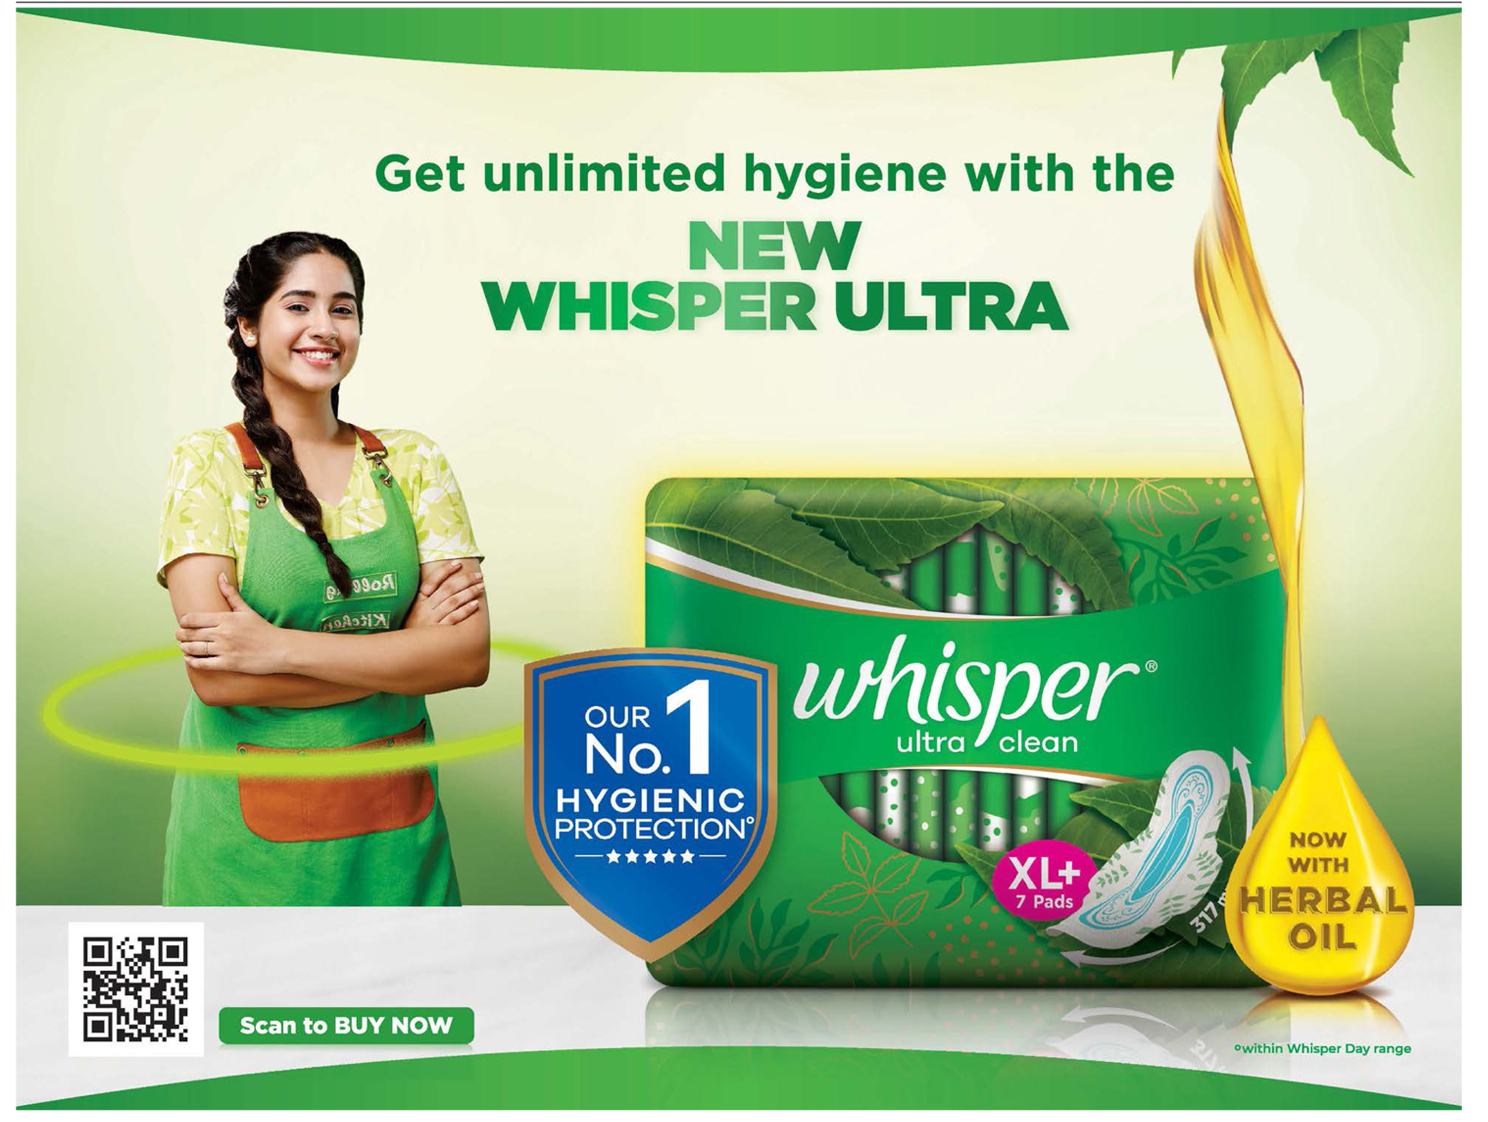 whisper-ultra-clean-get-unlimited-hygiene-with-the-neew-whisper-ultra-ad-deccan-chronicle-hyderabad-27-06-2021